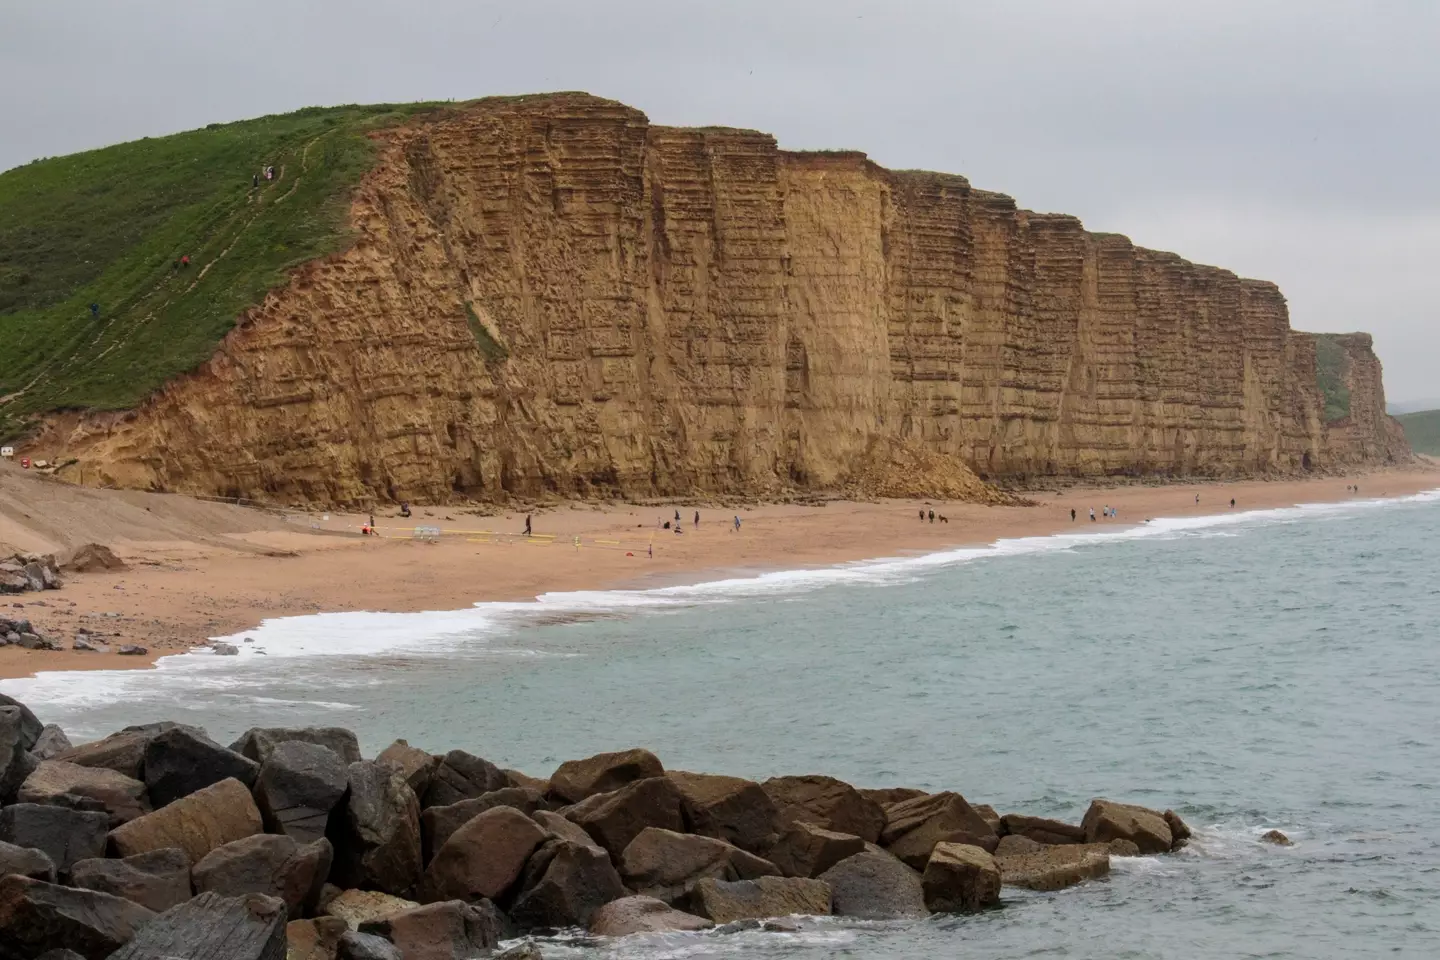 A Dorset Council spokesperson confirmed that the section of the beach where the collapse happened had been cordoned off by the West Bay coastguard.